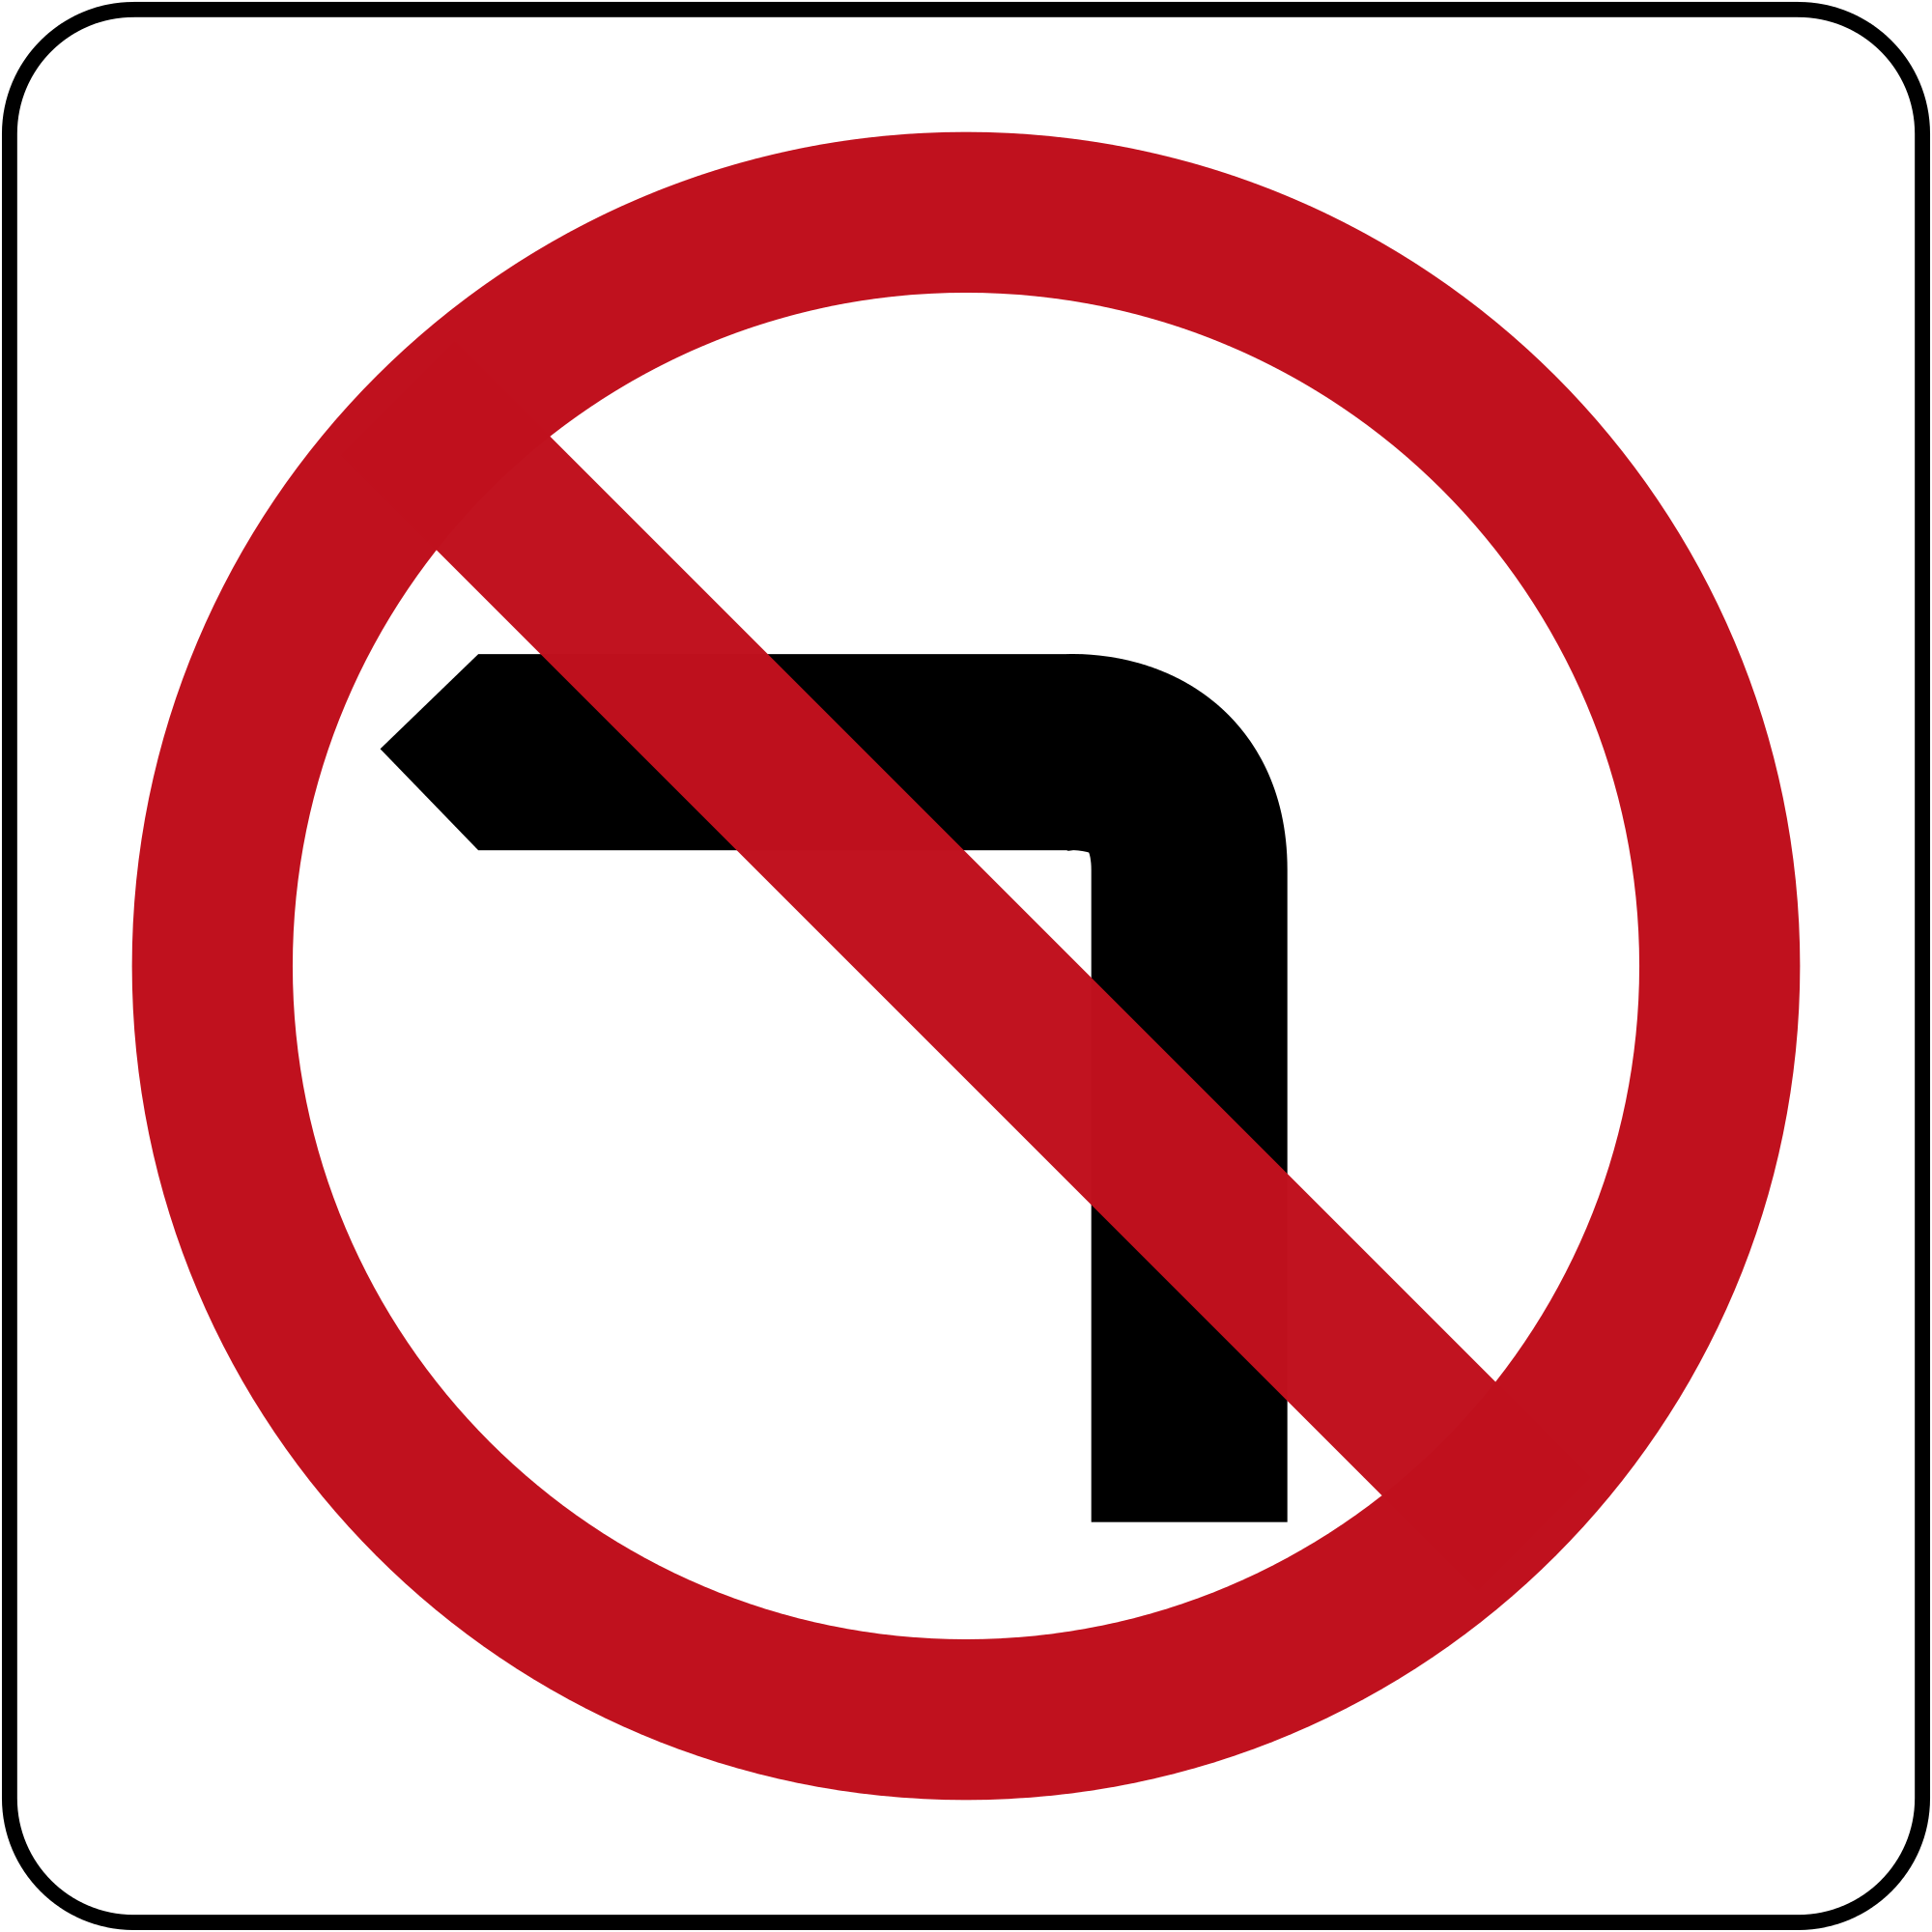 File:Brunei road sign - No Left Turn.svg - Wikimedia Commons